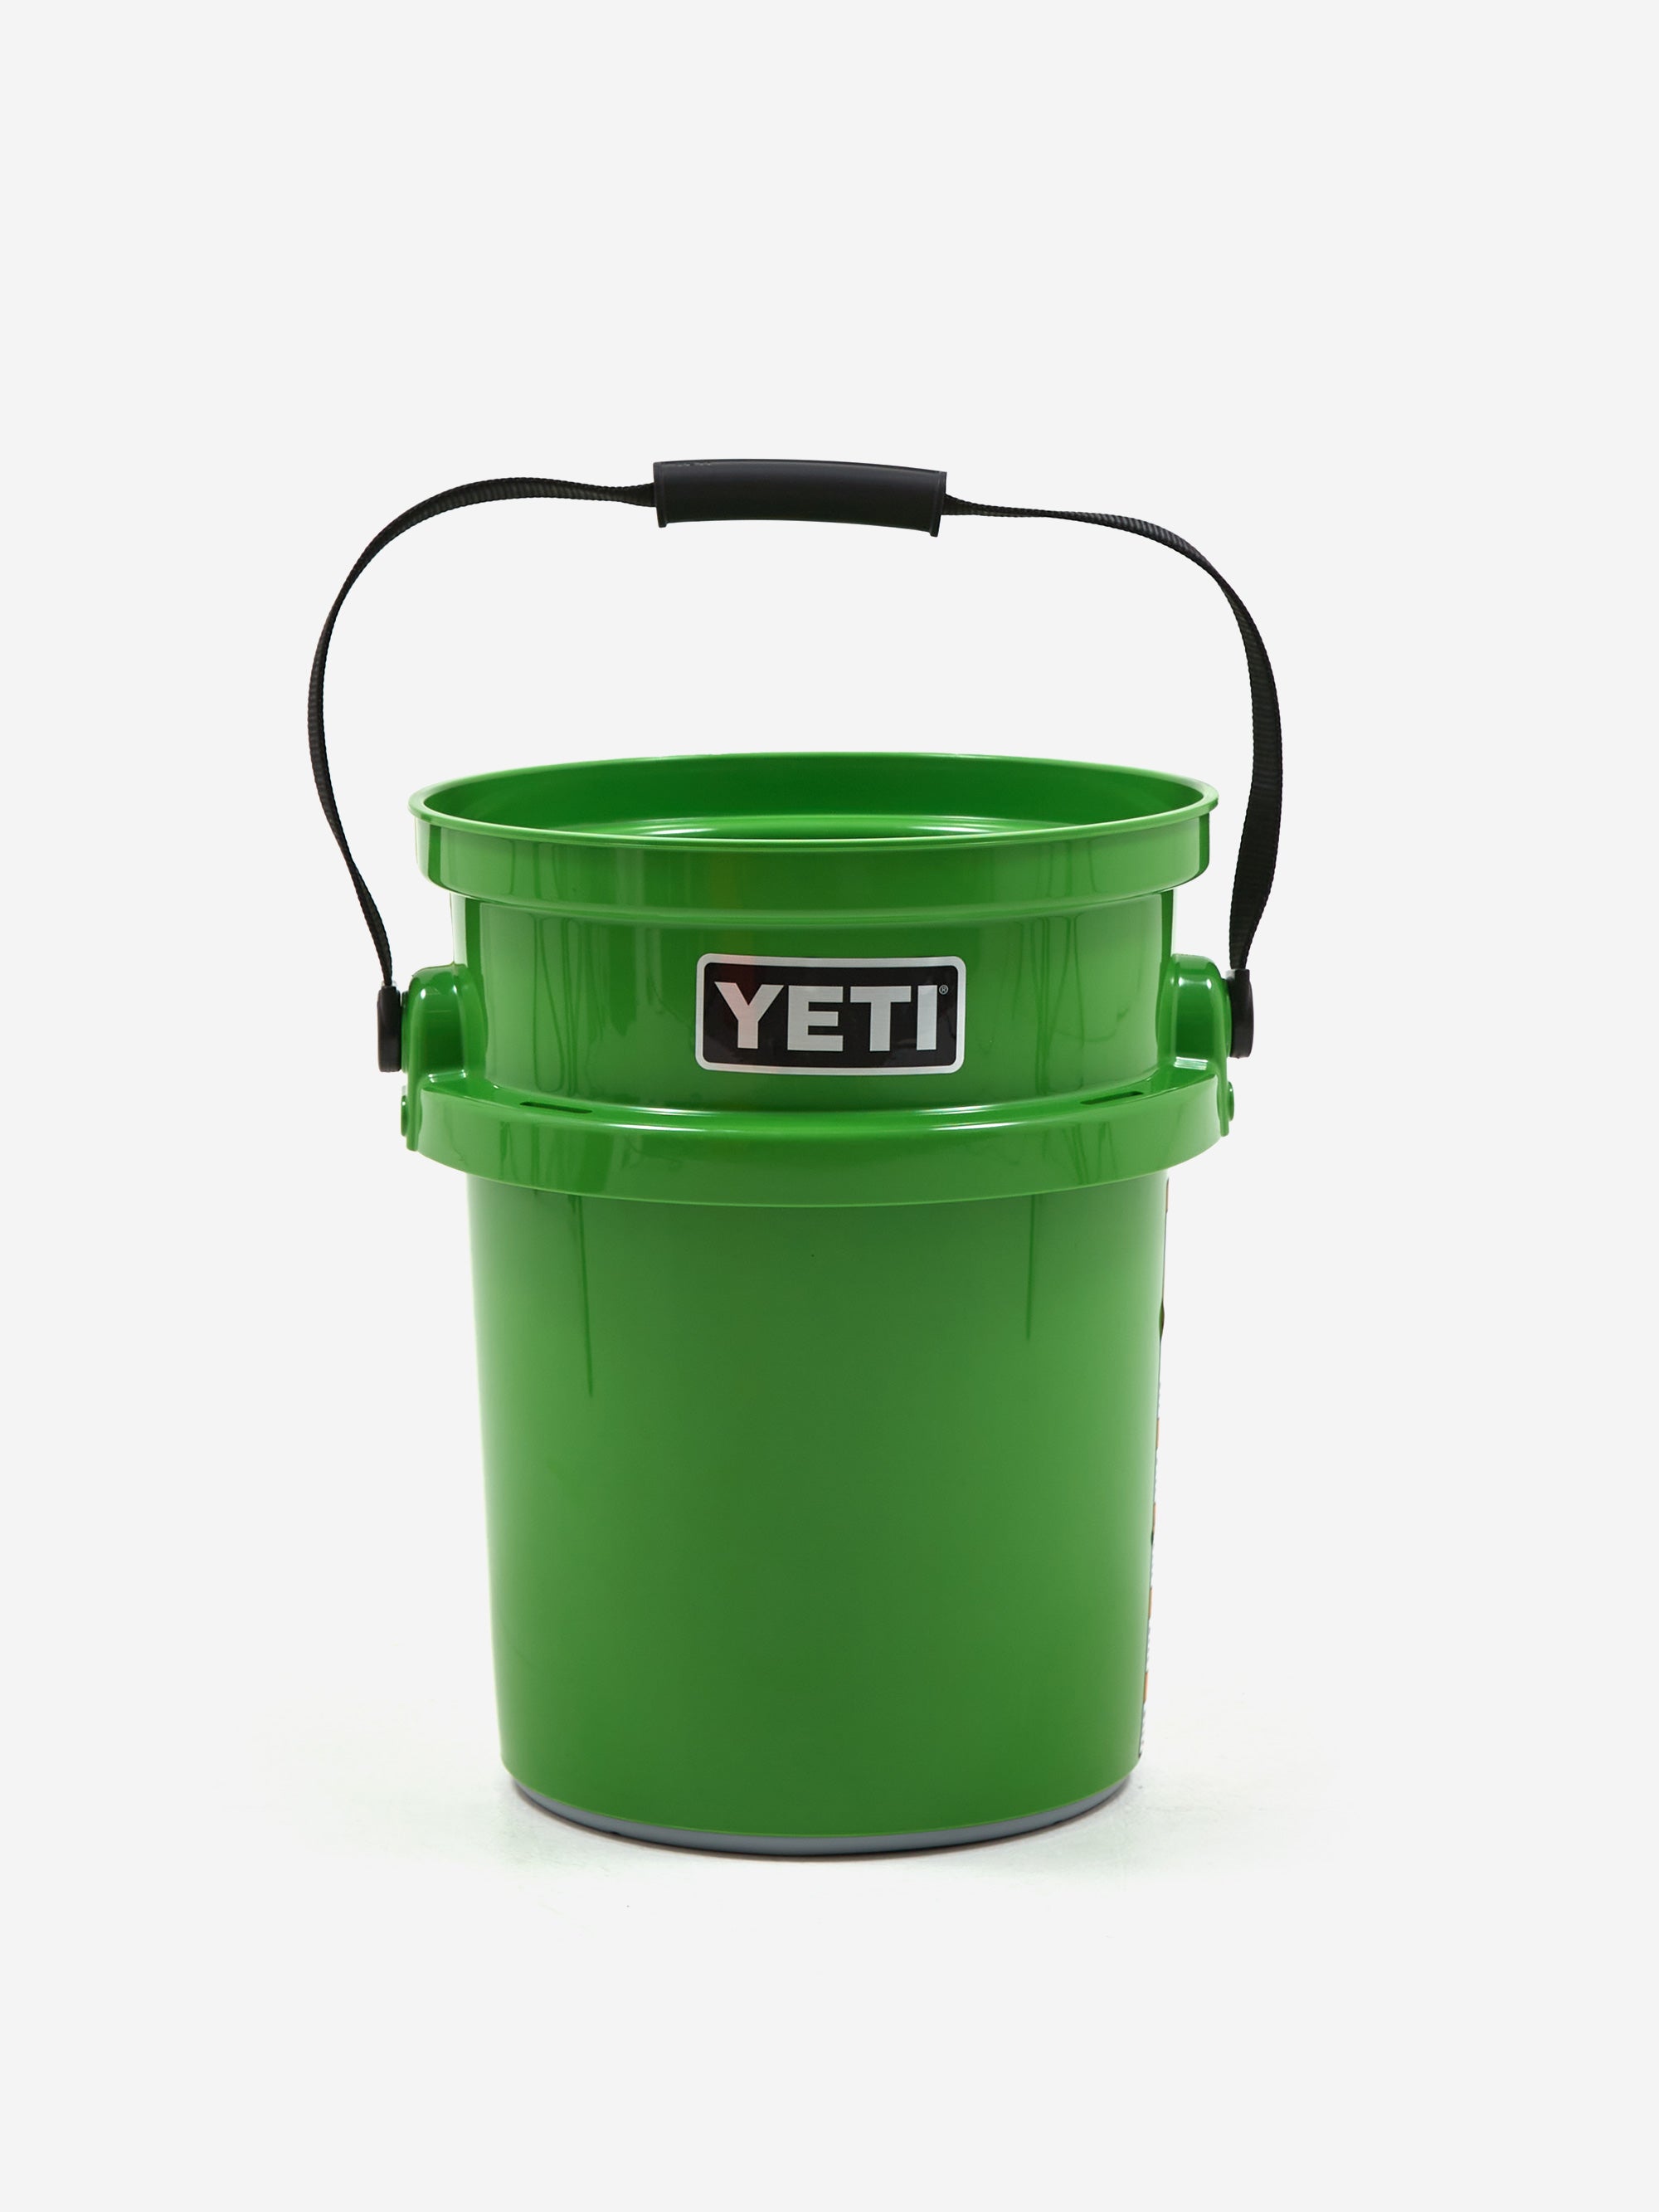 NEW YETI 5 Gallon LOADOUT BUCKET Canopy Green Limited Edition